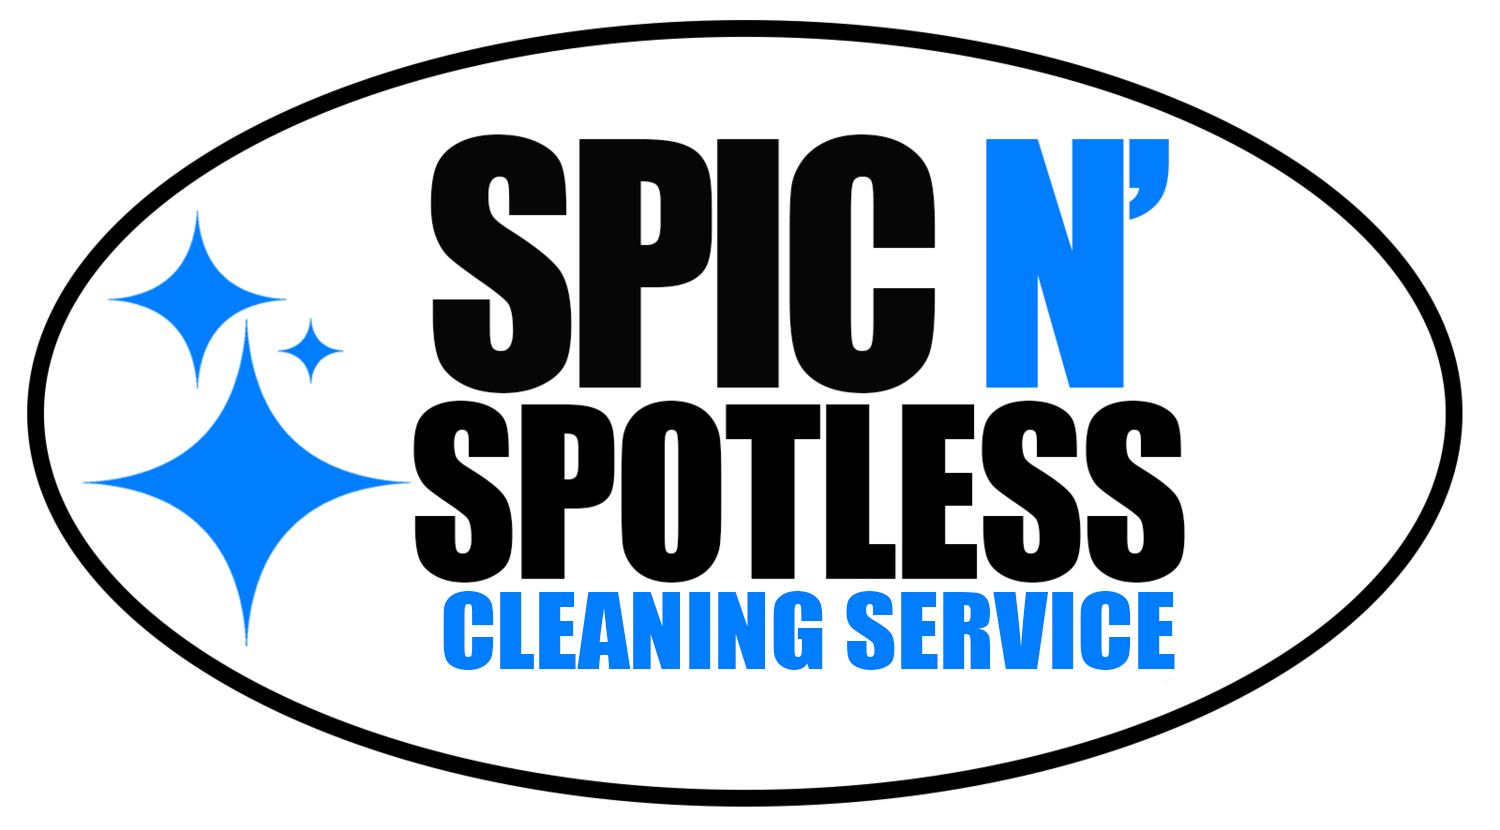 Spic N Spotless A Customer Friendly Cleaning Service in Baltimore Maryland